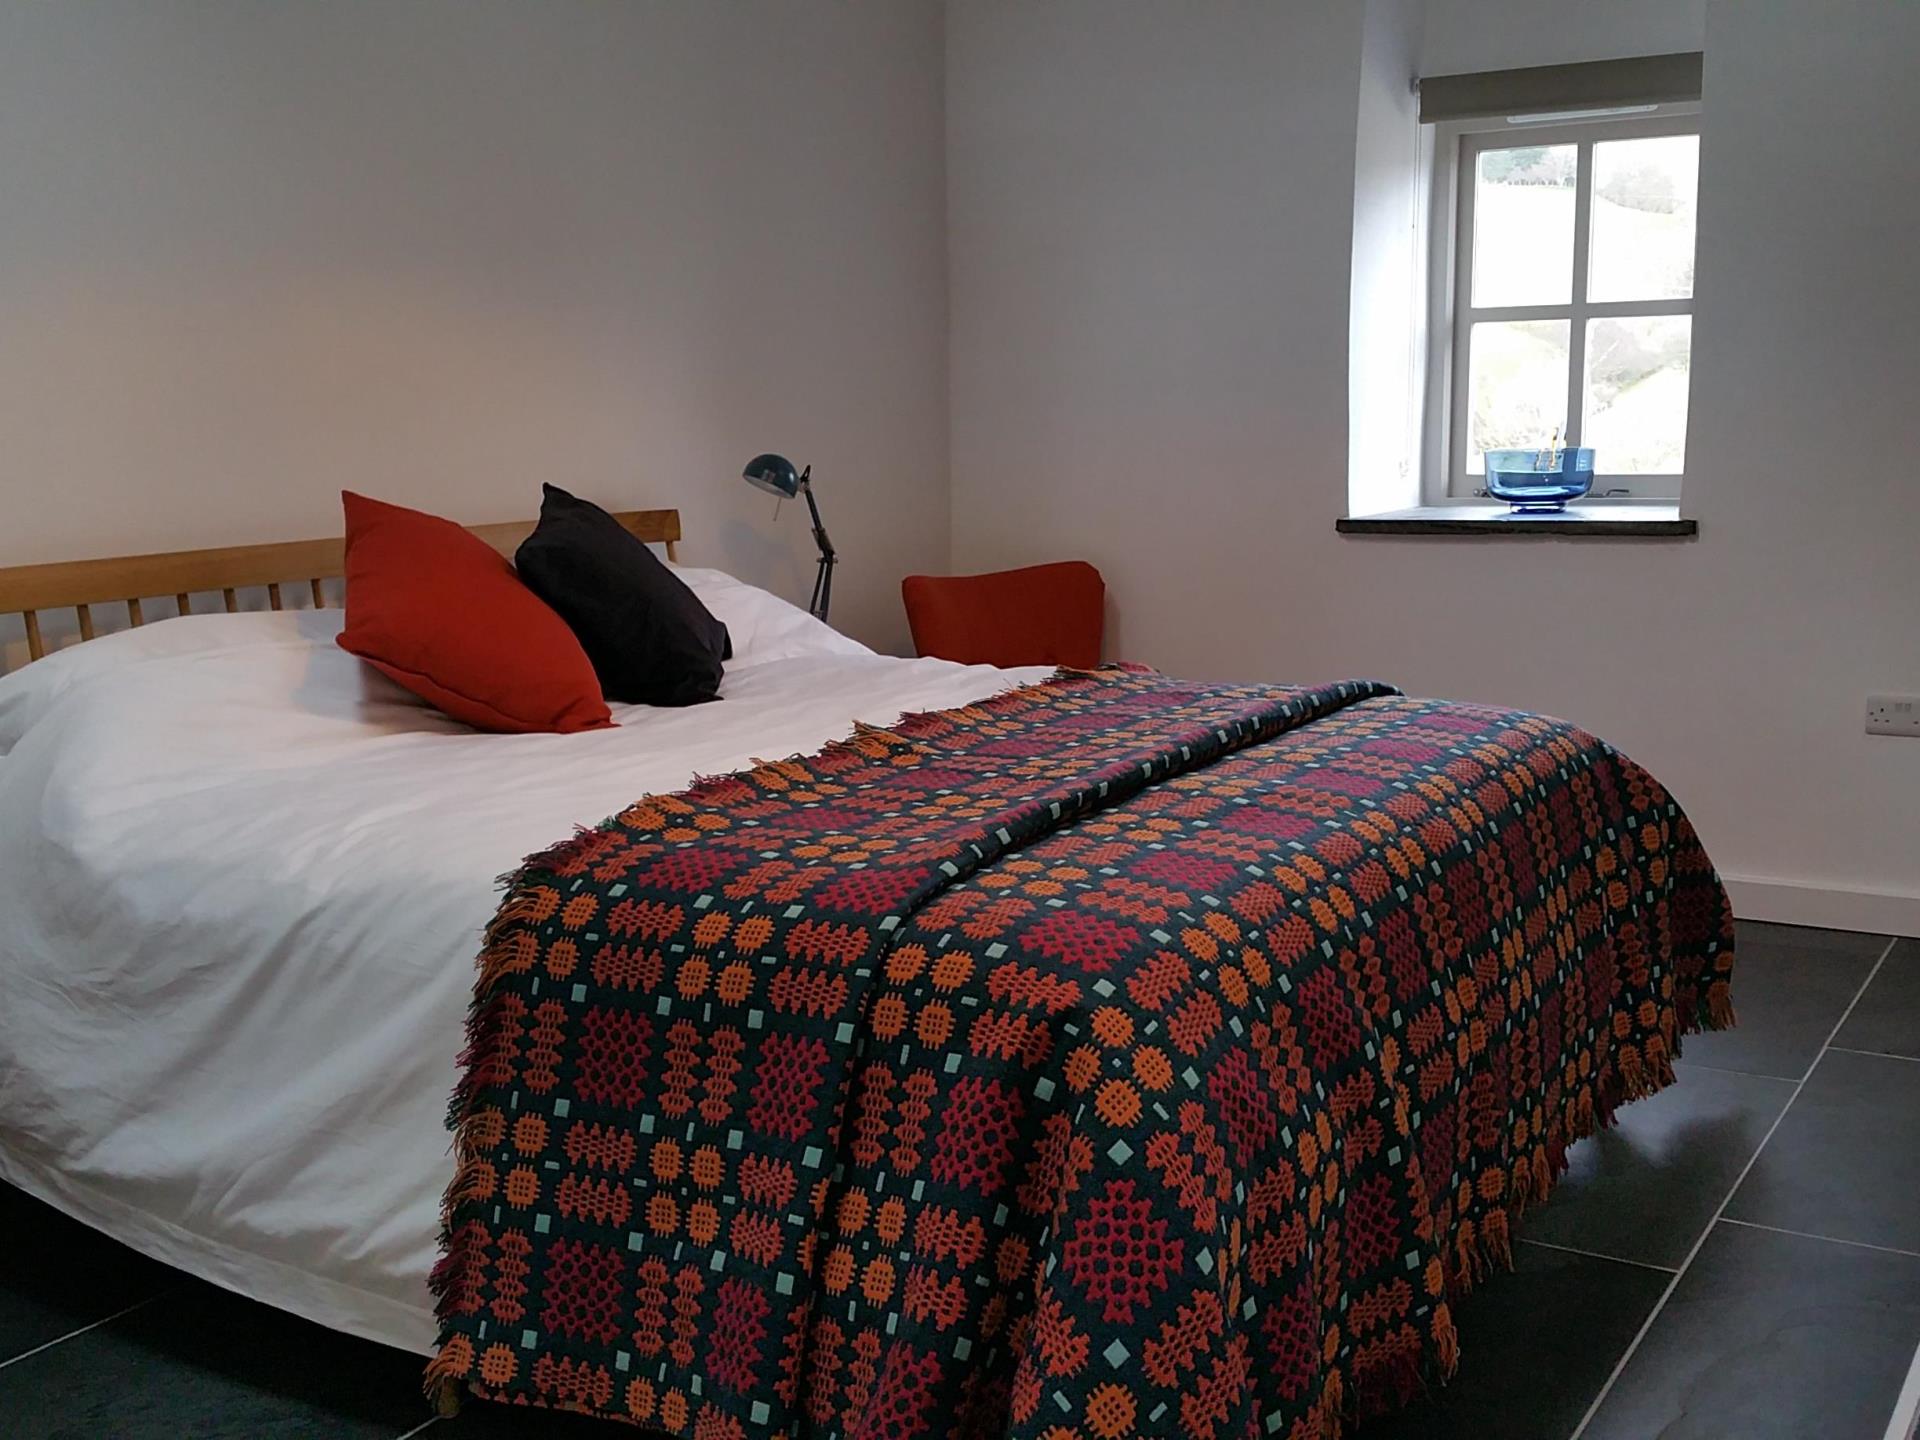 Owl/ Gwdihw bedroom with traditional Welsh blanket